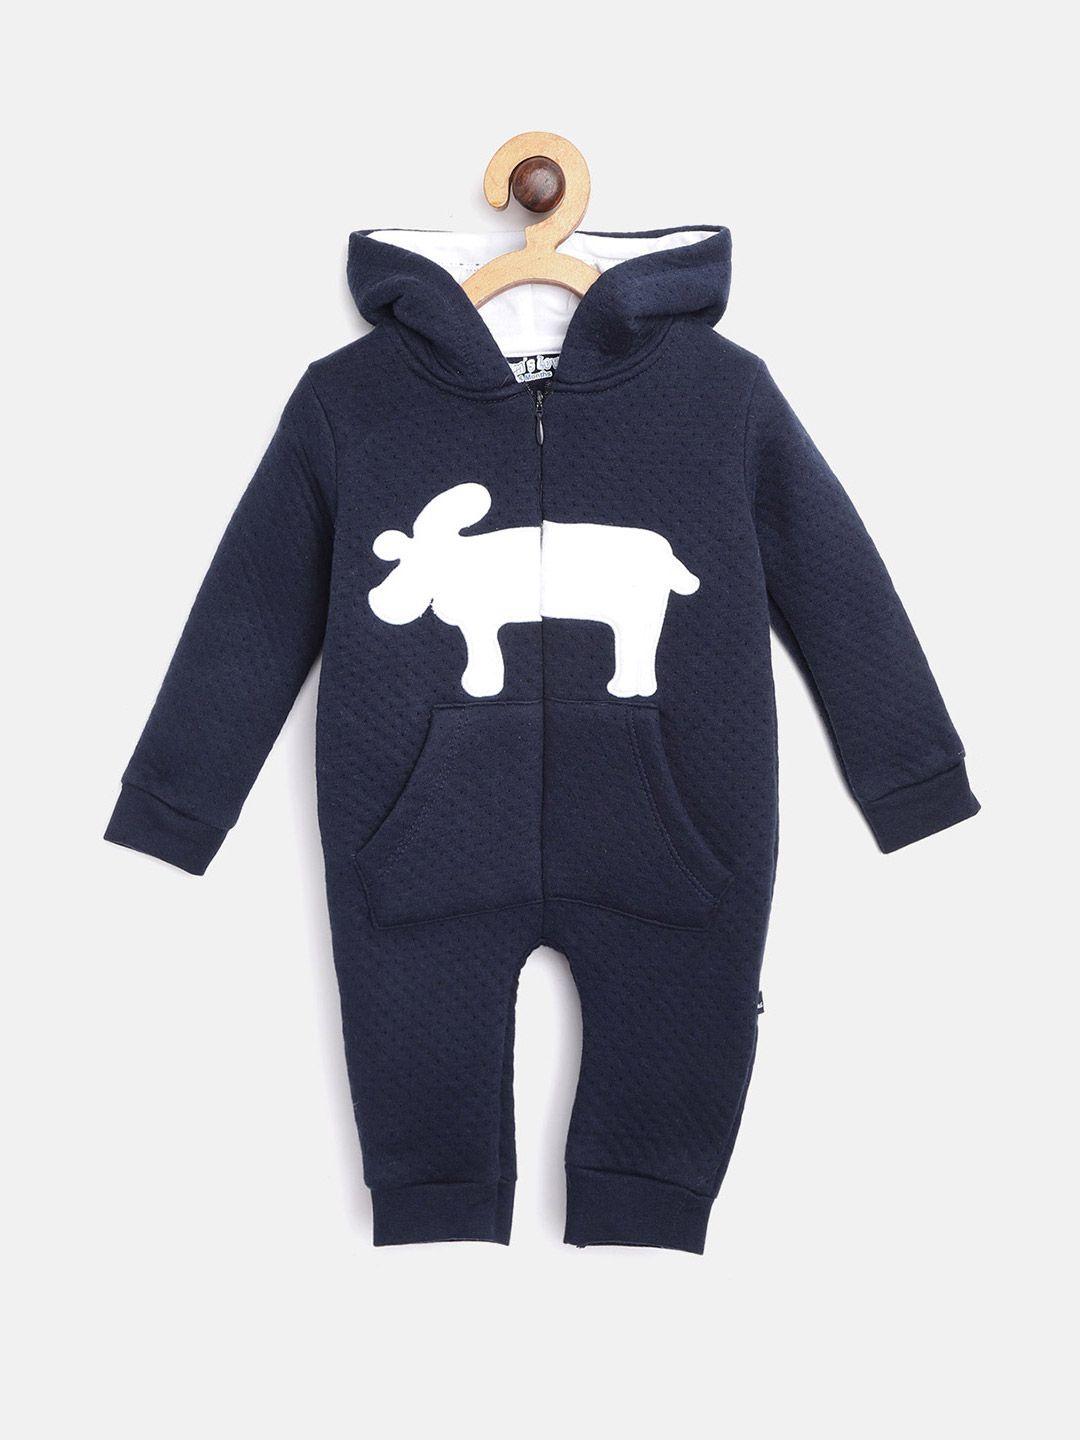 moms-love-boys-navy-blue-perforated-hooded-rompers-with-applique-detail